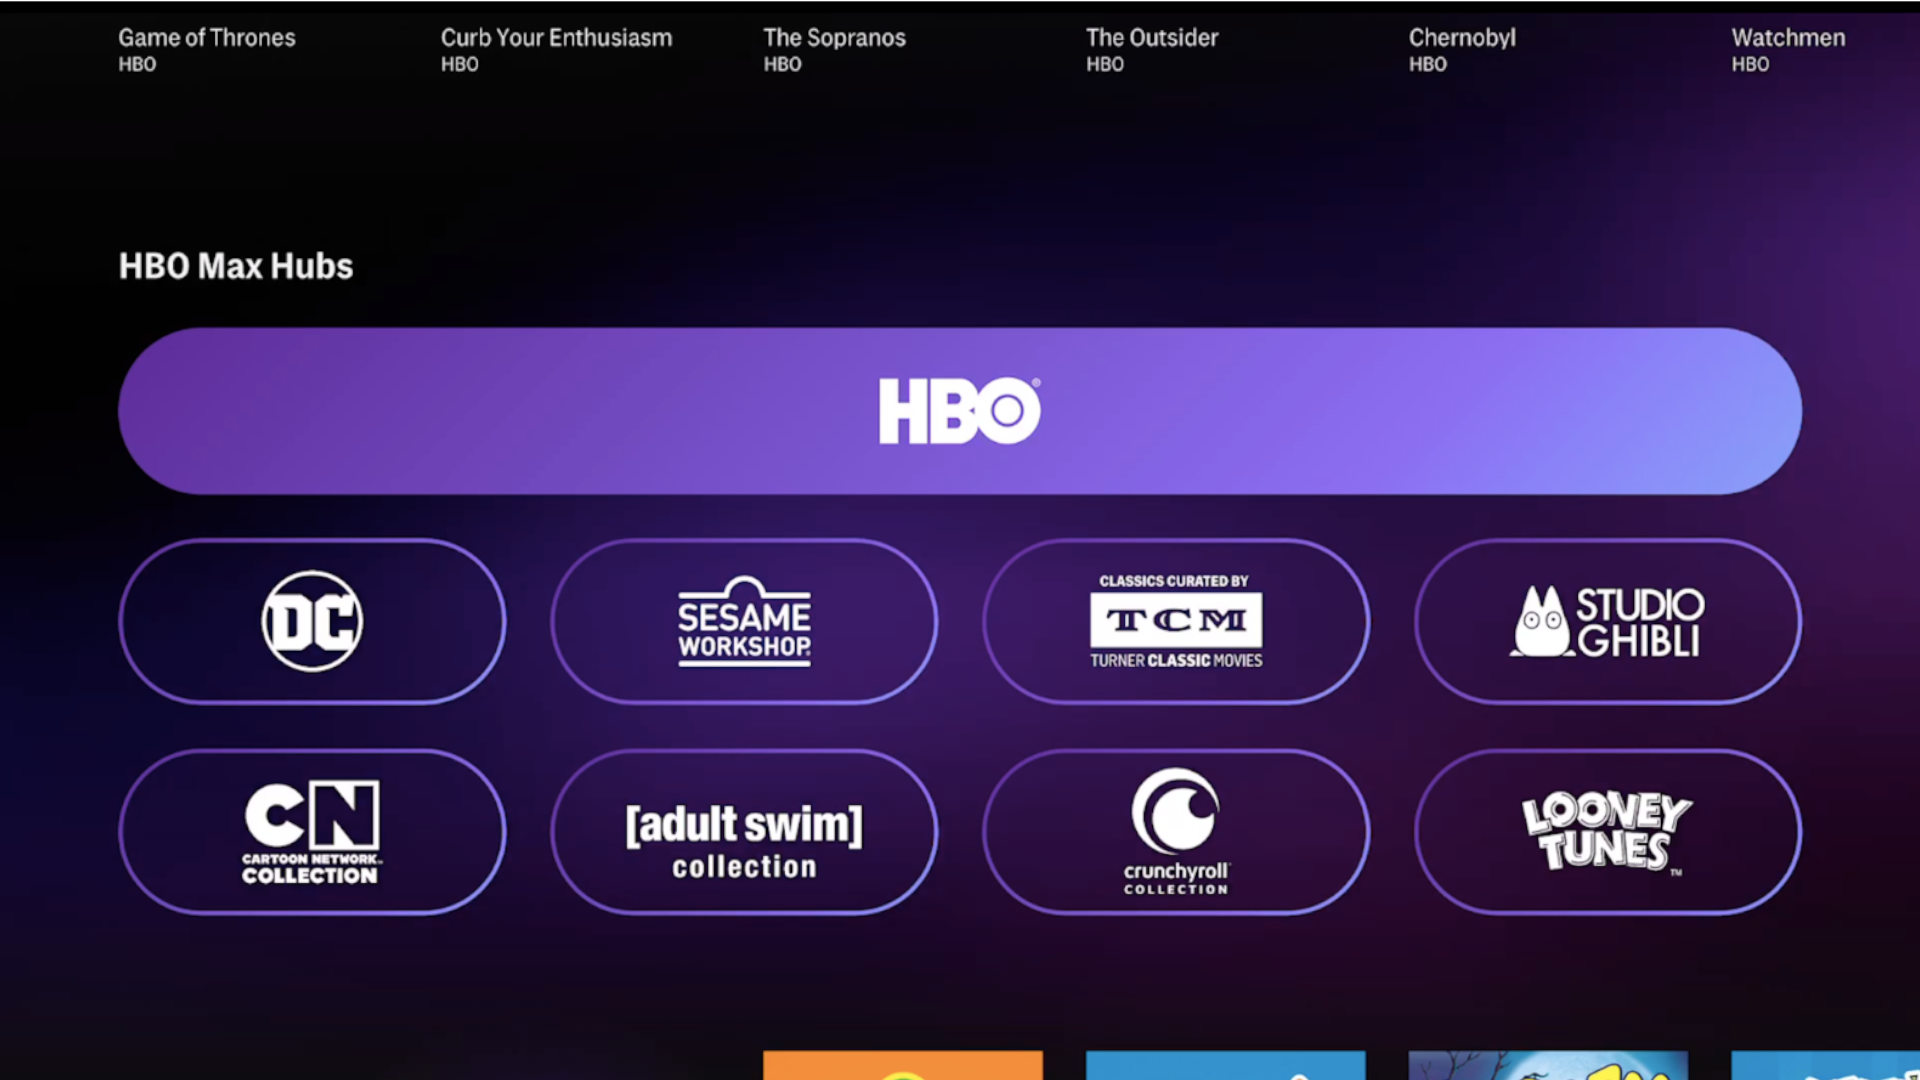 HBO Max screen showing their different categories including DC, HBO, and Cartoon Network